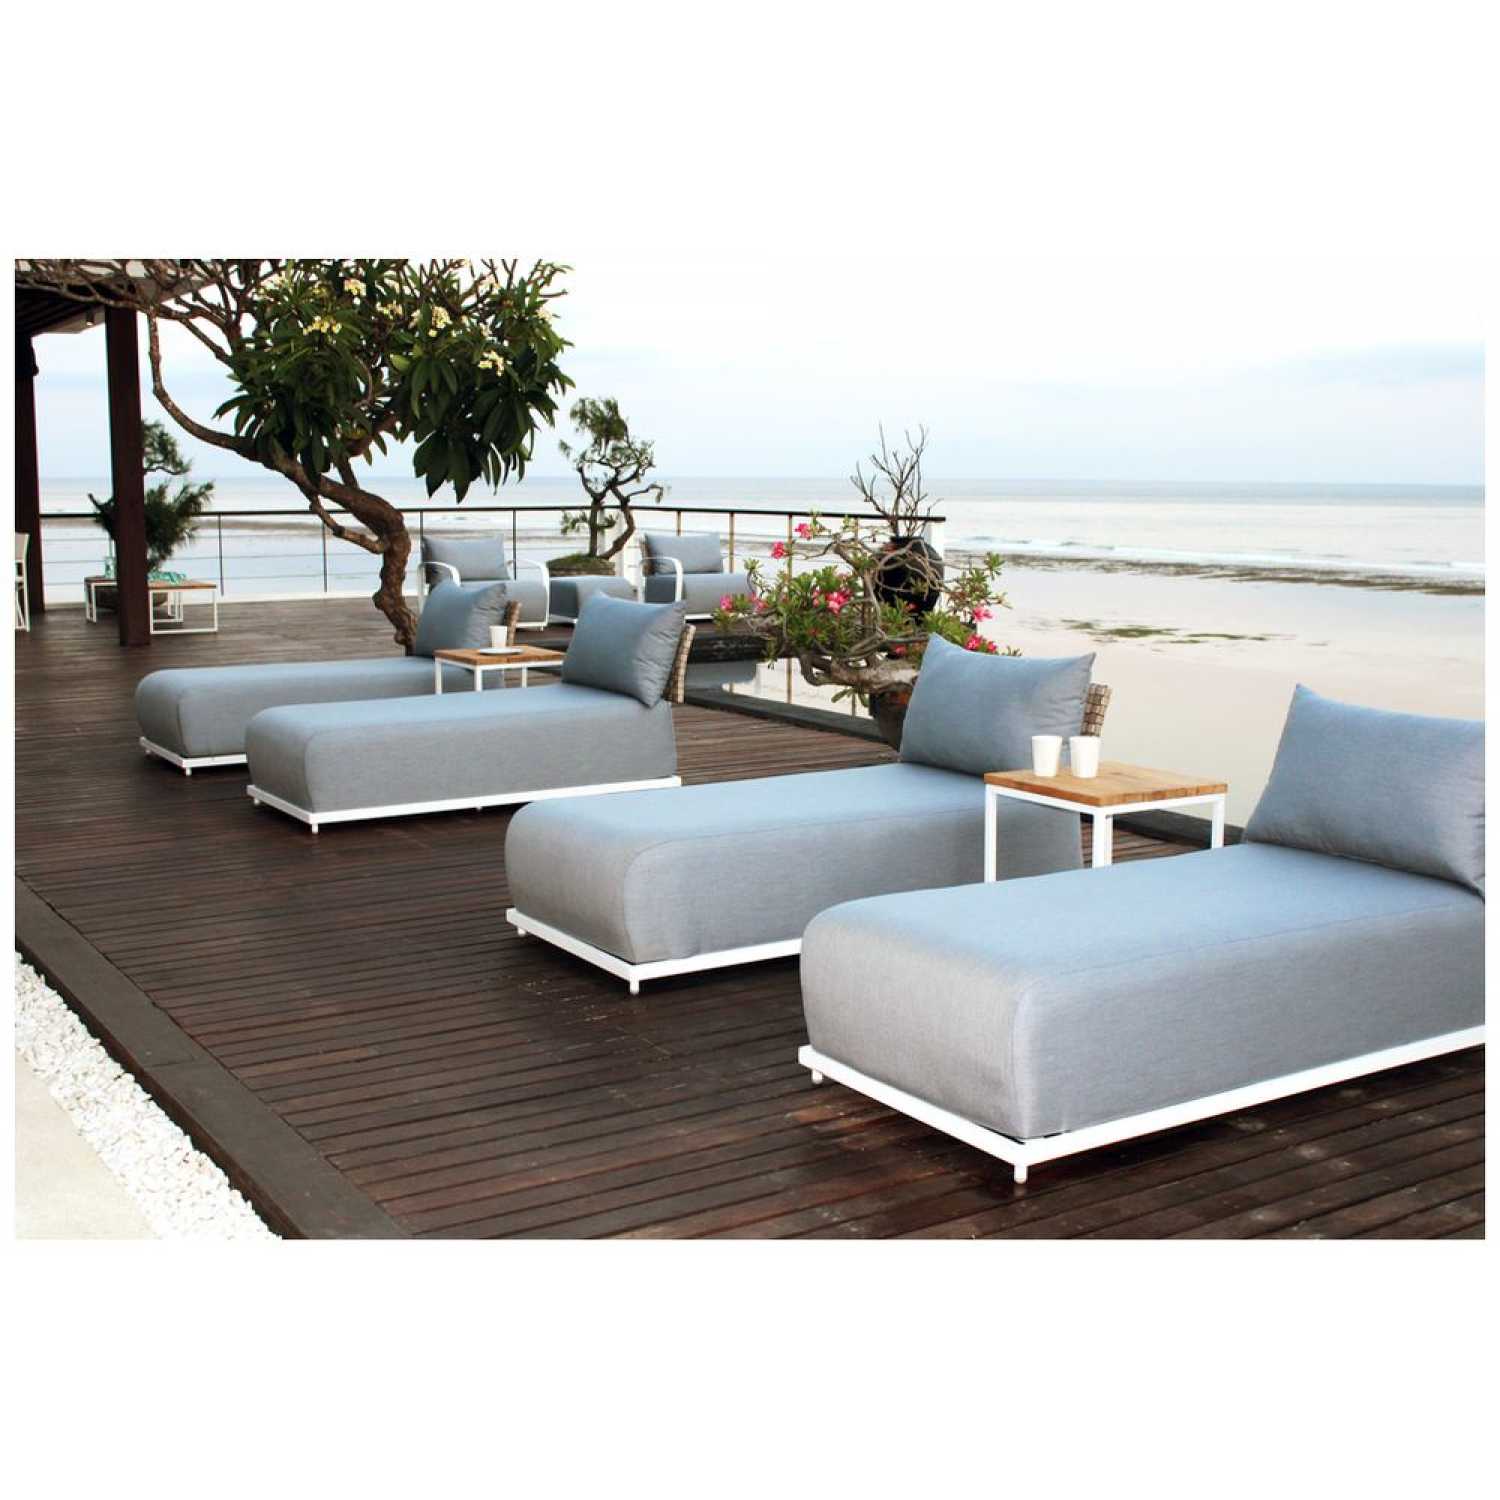 Windsor White Chaise with Nautic Square Side Table - PadioLiving - Windsor White Chaise with Nautic Square Side Table - Outdoor Chaise with Side Table - 2 lounger with 1 Side Table - PadioLiving